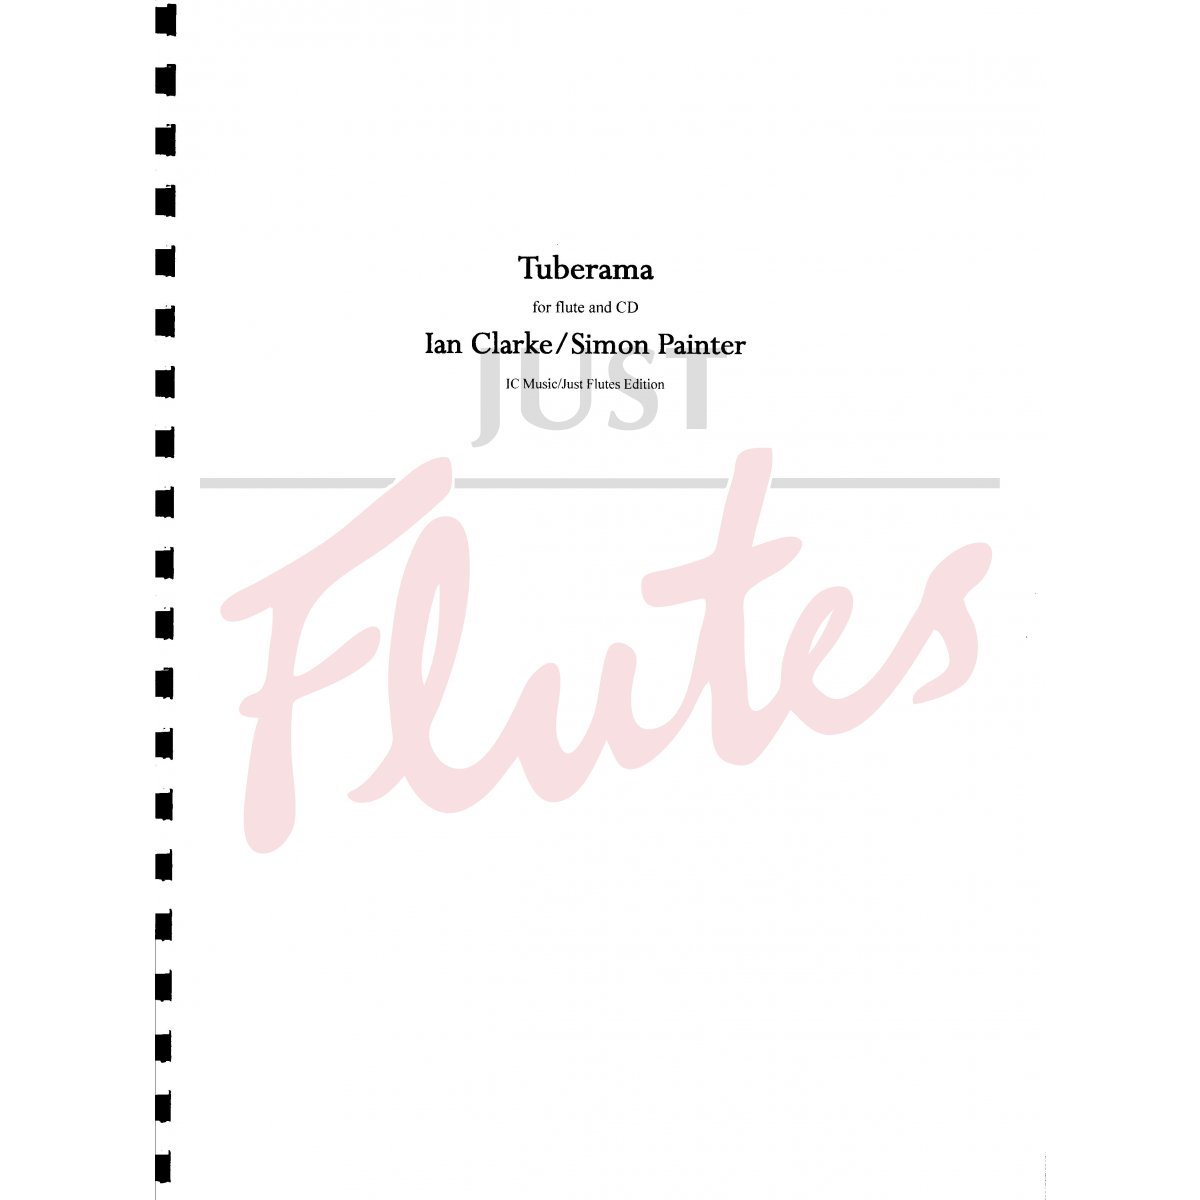 Tuberama for Flute and Electronics